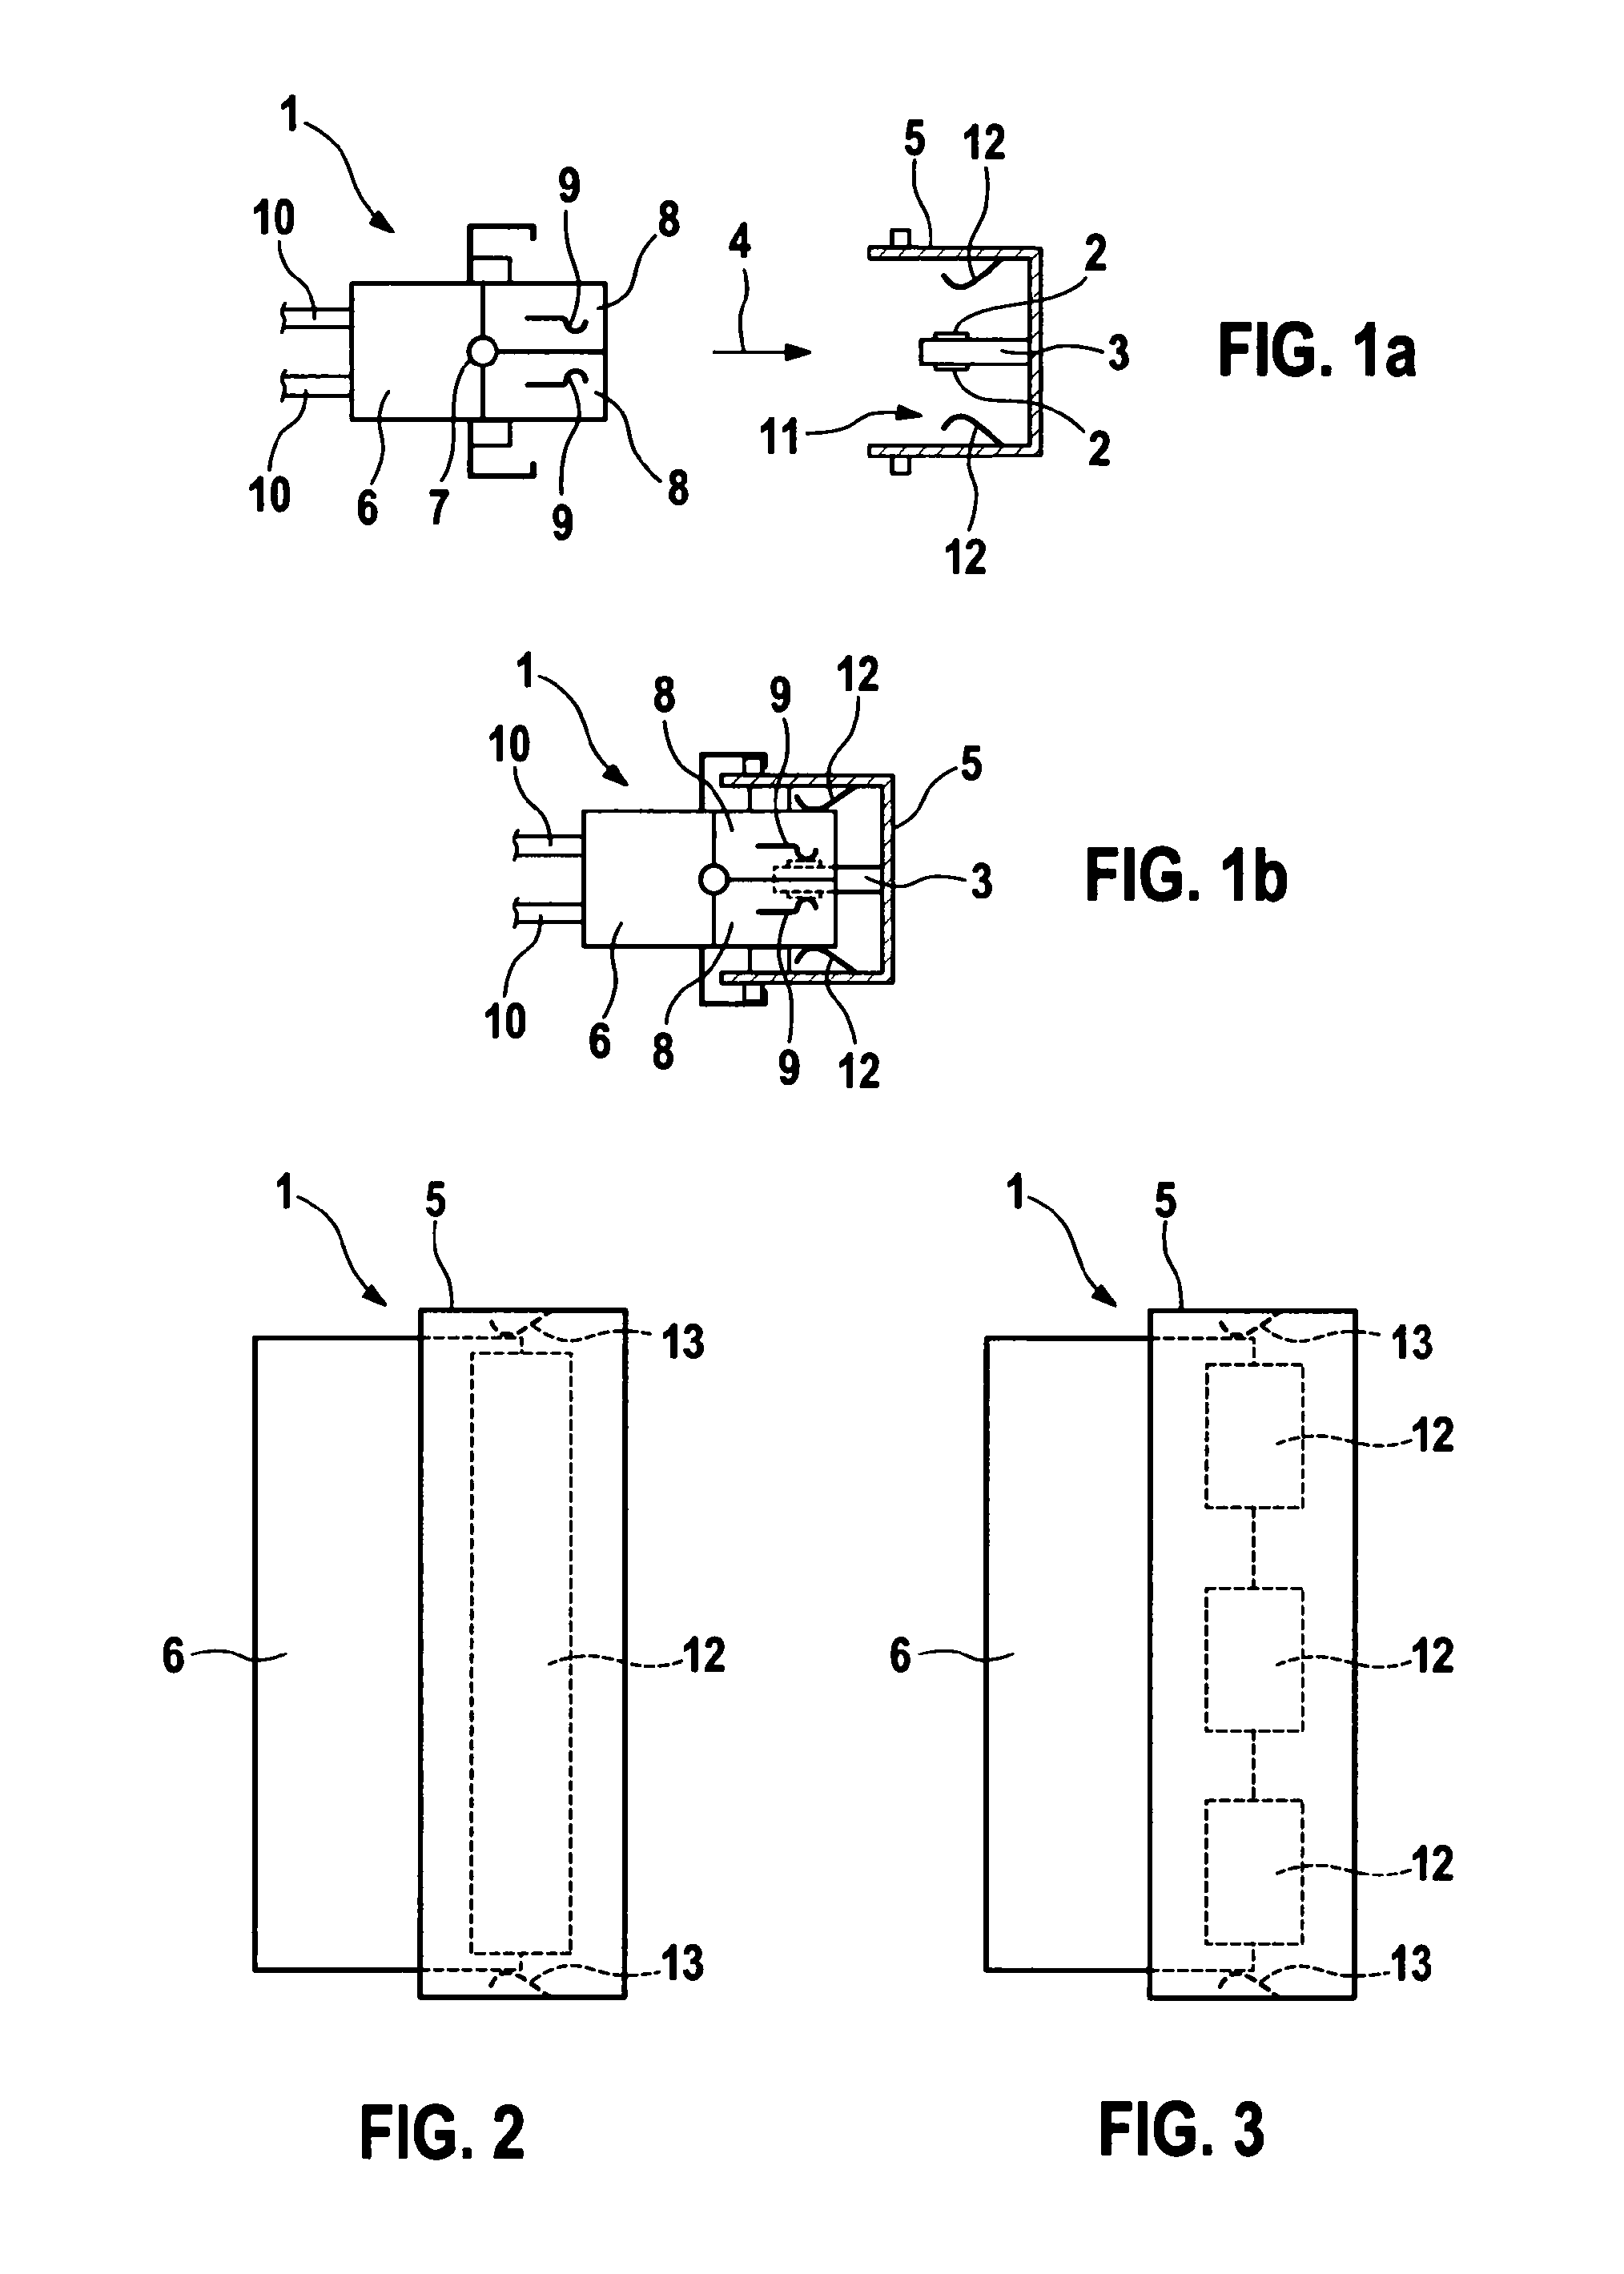 Plug connection for the direct electrical contacting of a circuit board